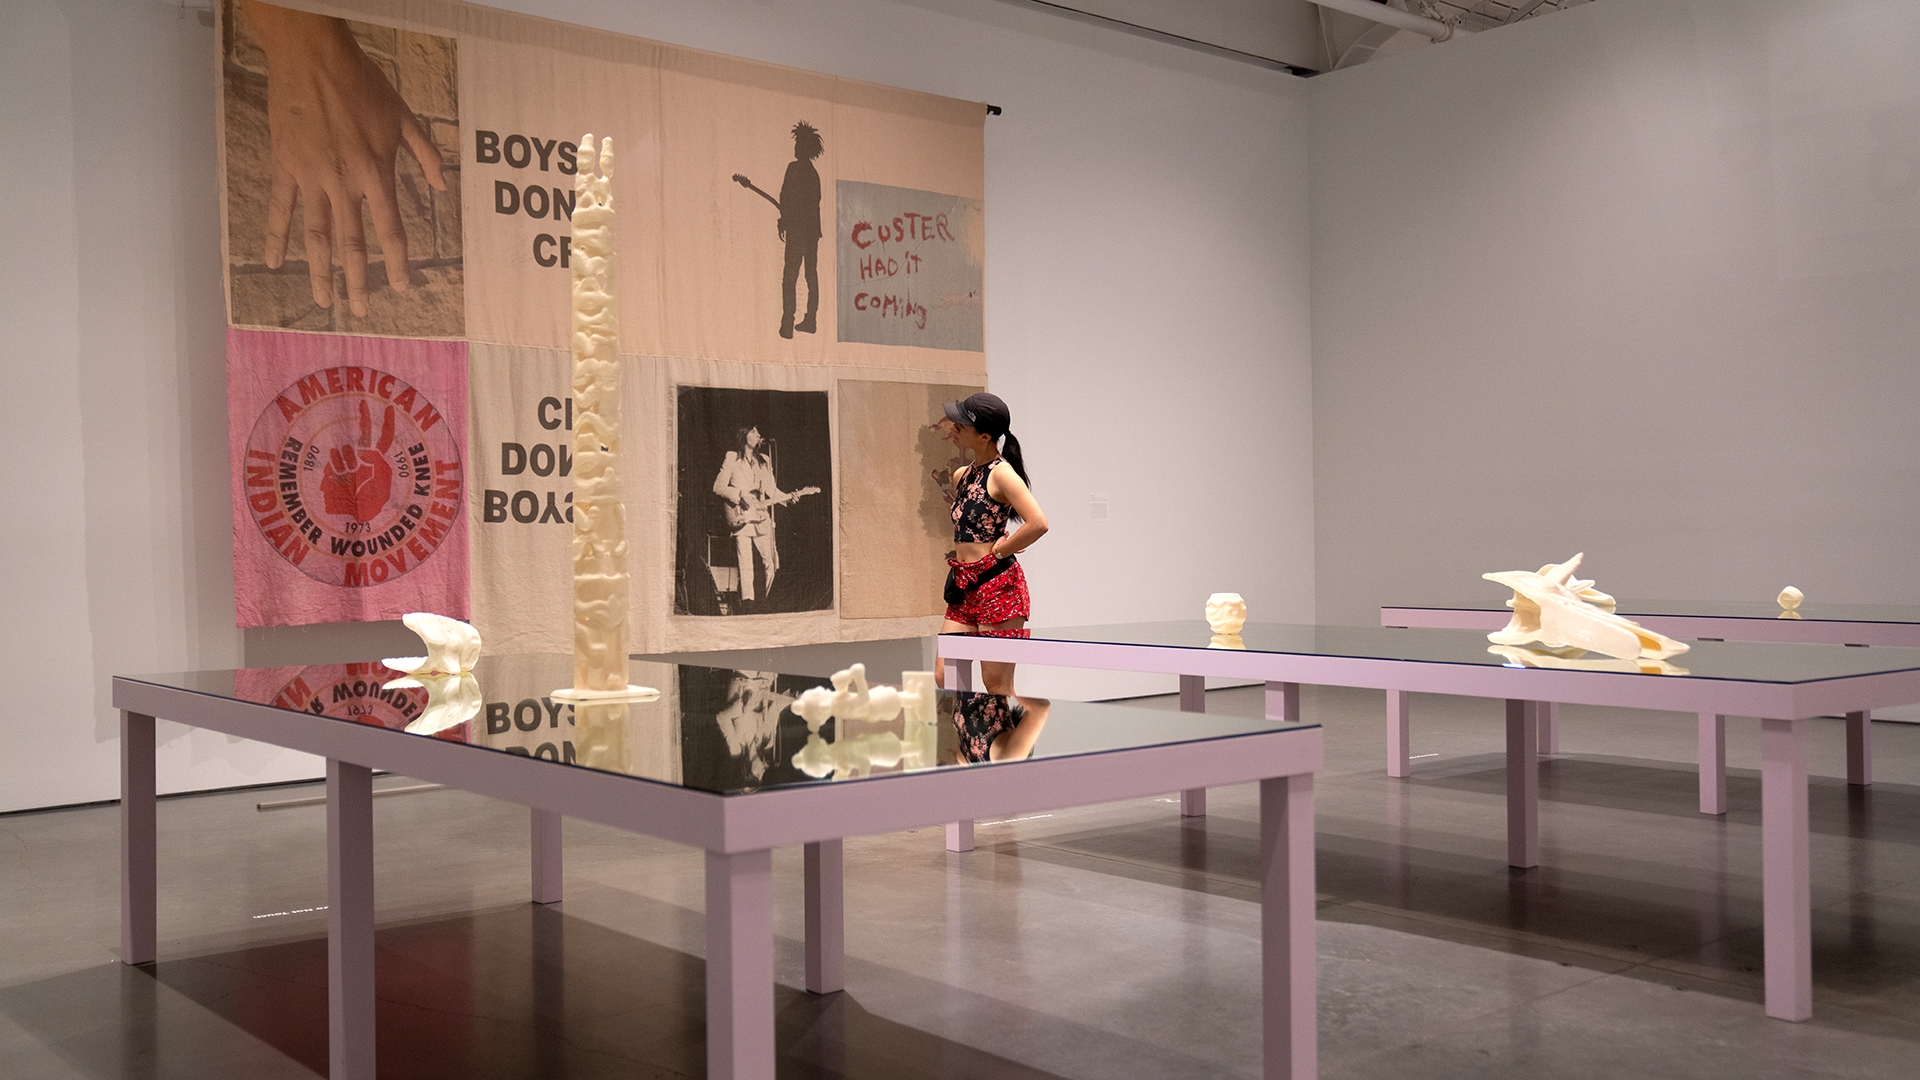 in background: a person in an gallery looks closely at a large linen artwork hanging on the wall, which has the words "boys don't cry" and "custer had it coming"; in foreground: eight cream-colored 3D printed objects sit on dark mirrored tables